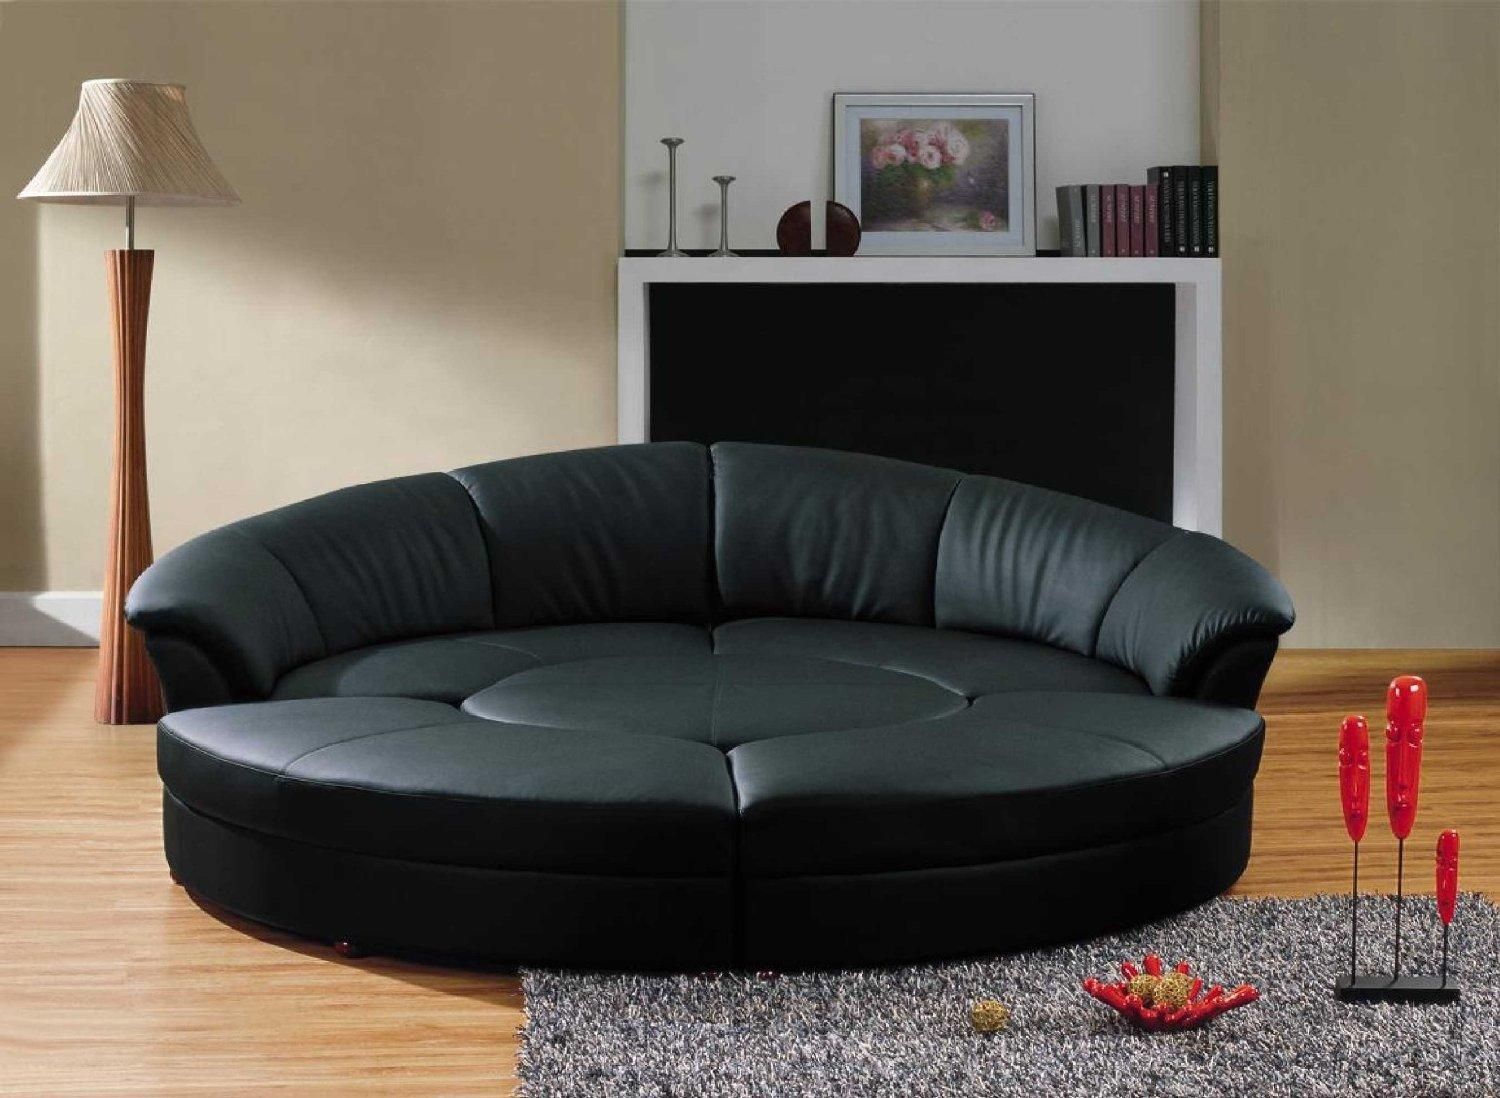 Round Sectional Sofa For Unique Seating Alternative – Traba Homes Pertaining To Round Sectional Sofa Bed (View 6 of 20)